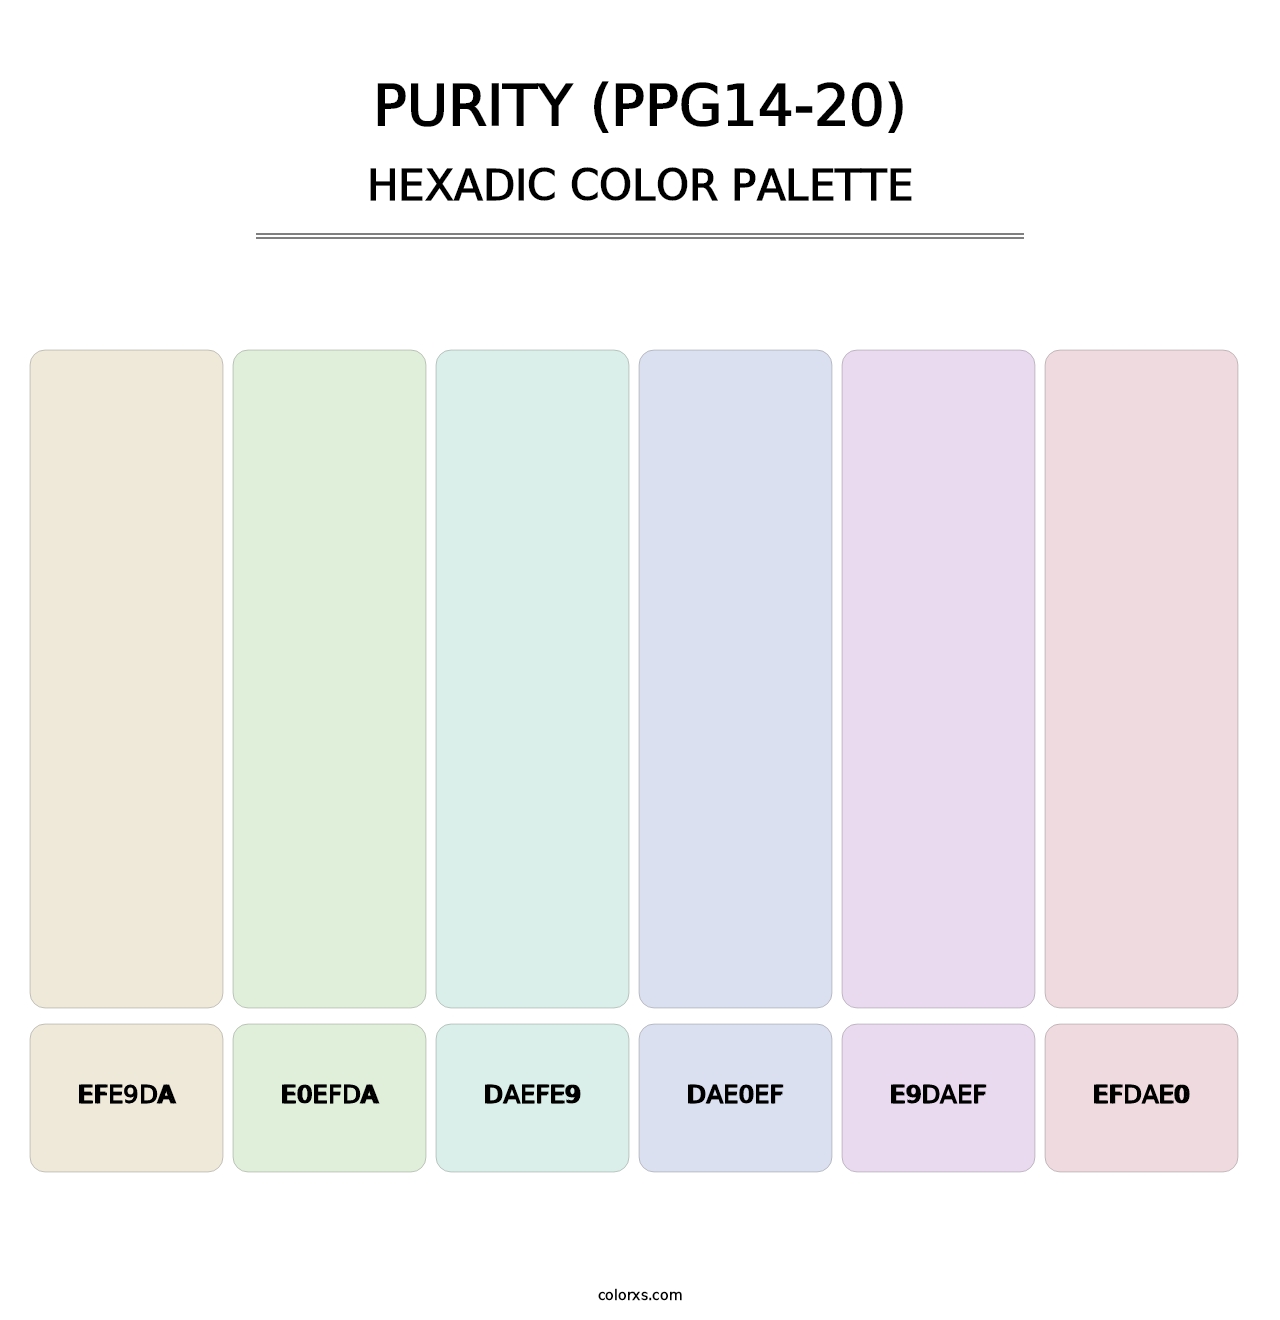 Purity (PPG14-20) - Hexadic Color Palette